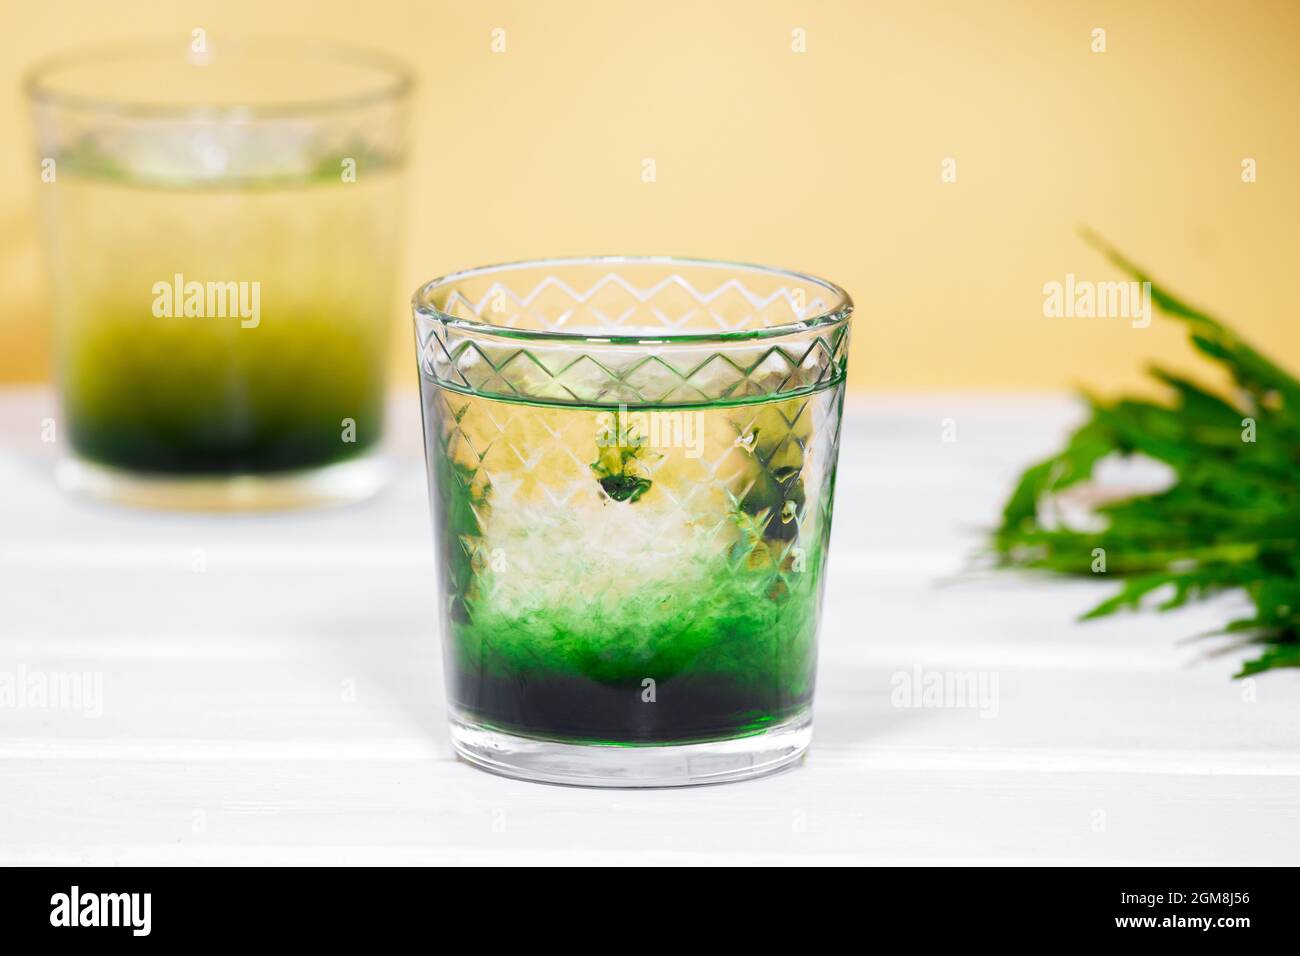 Green Chlorophyll or Chlorella drink in glass with water on white table,  Orange Background. Green Drops in clear water, Antioxidant food and drinks  Stock Photo - Alamy